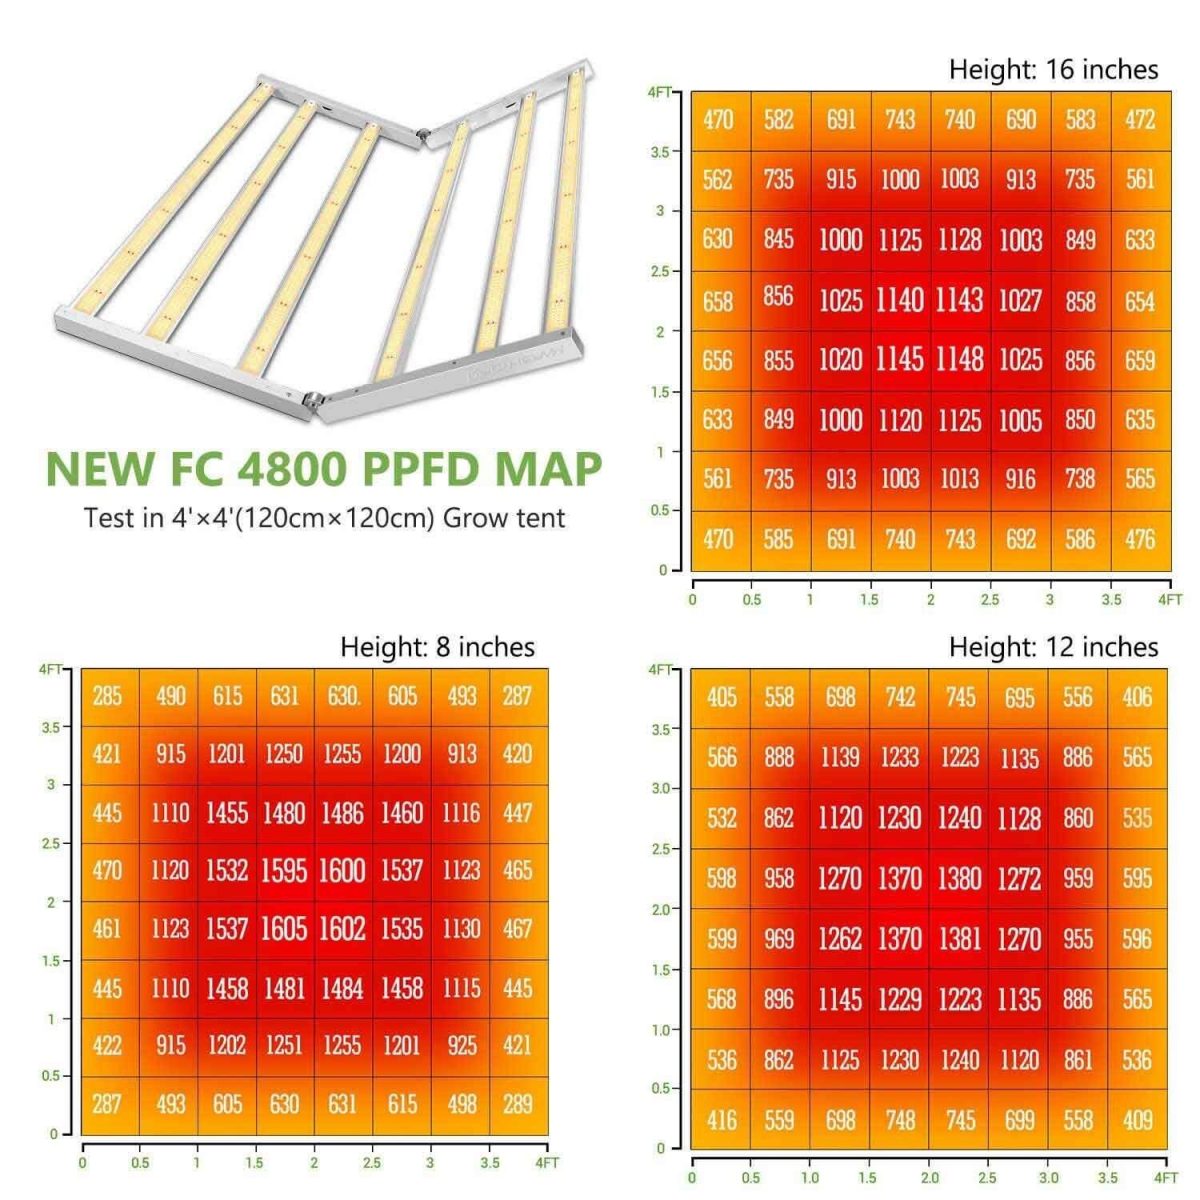 Two PPFD maps of the FC4800 LED grow light tested in a 4'x4' grow tent at 8 inches for co2 added growth and at 10 inches without co2 added.